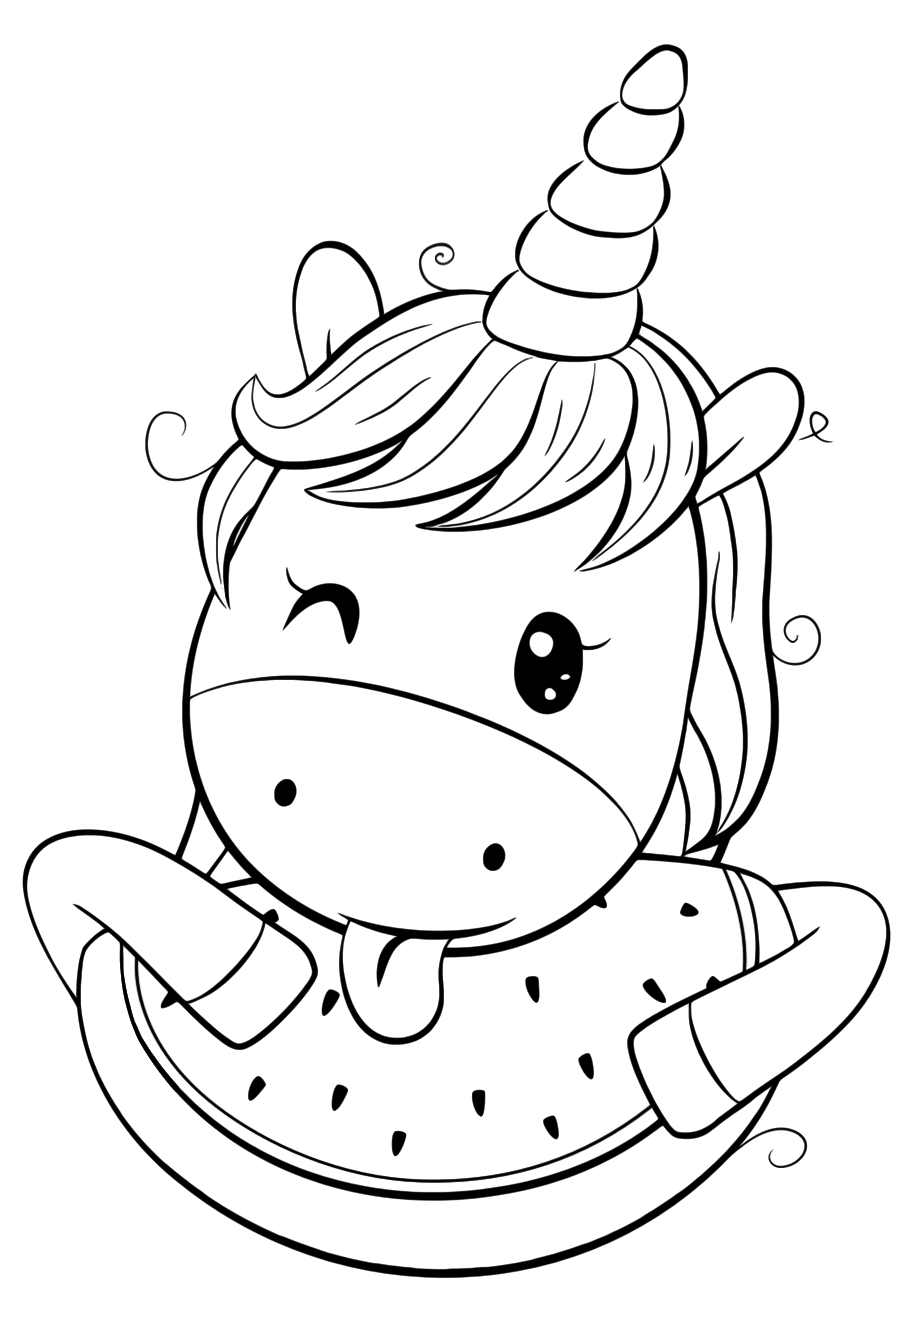 Cute Unicorn Coloring Pages - Youloveit - Coloring Home pour E Dessin Kawaii